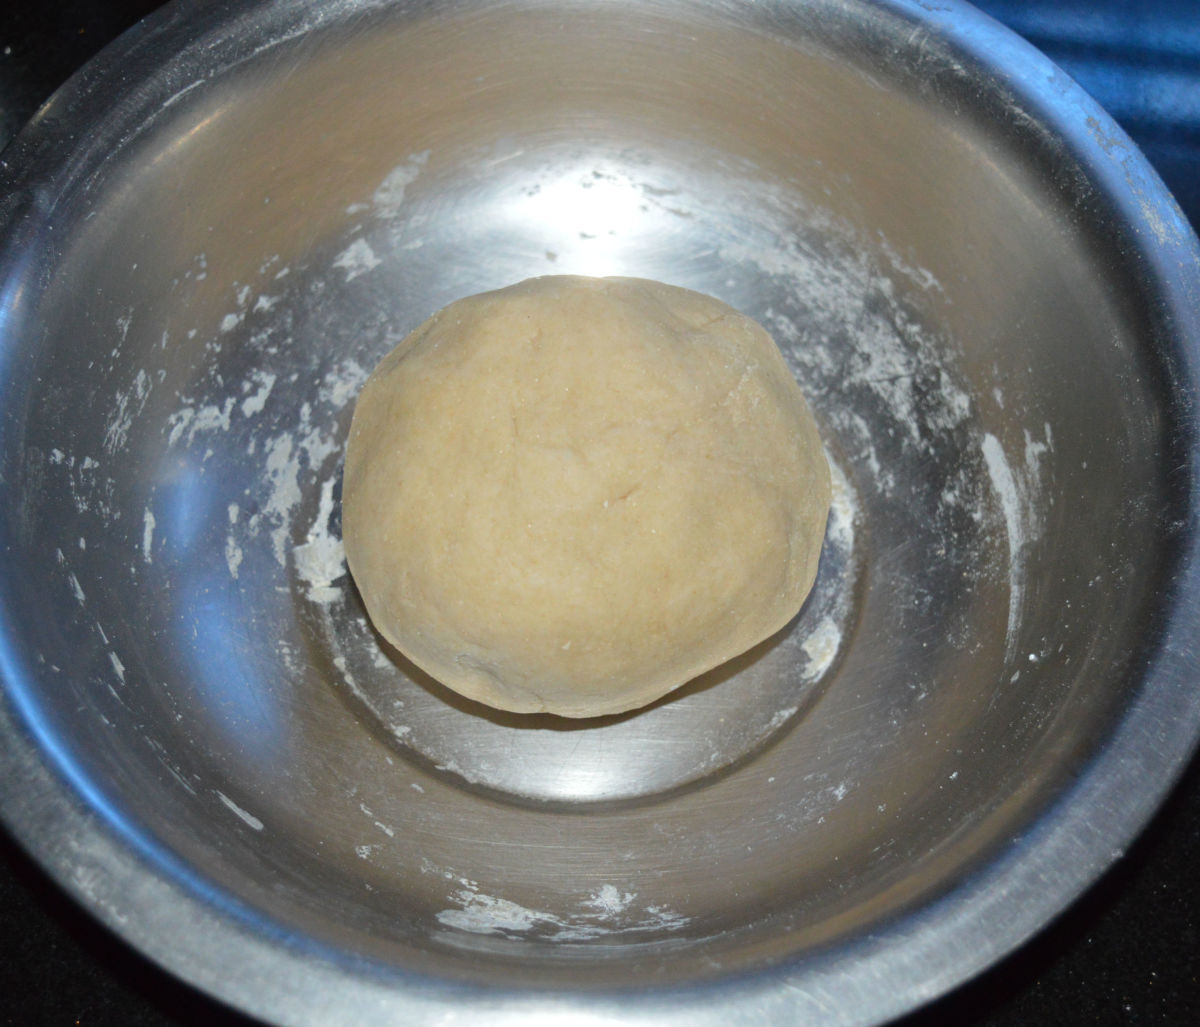 1. Make a firm, soft, and pliable dough as per instructions. Cover it and keep aside.